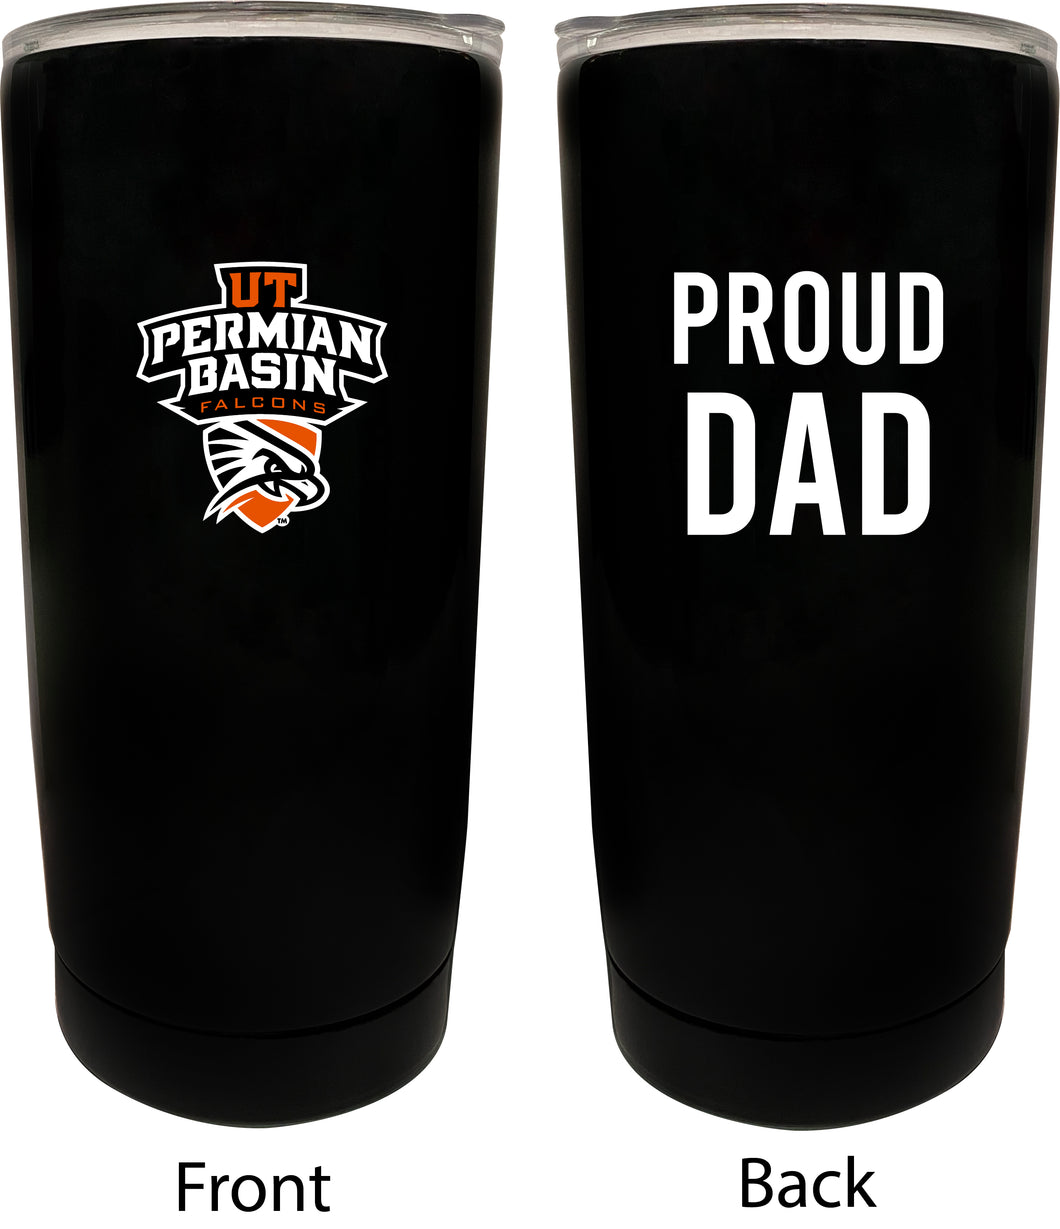 University of Texas of the Permian Basin NCAA Insulated Tumbler - 16oz Stainless Steel Travel Mug Proud Dad Design Black